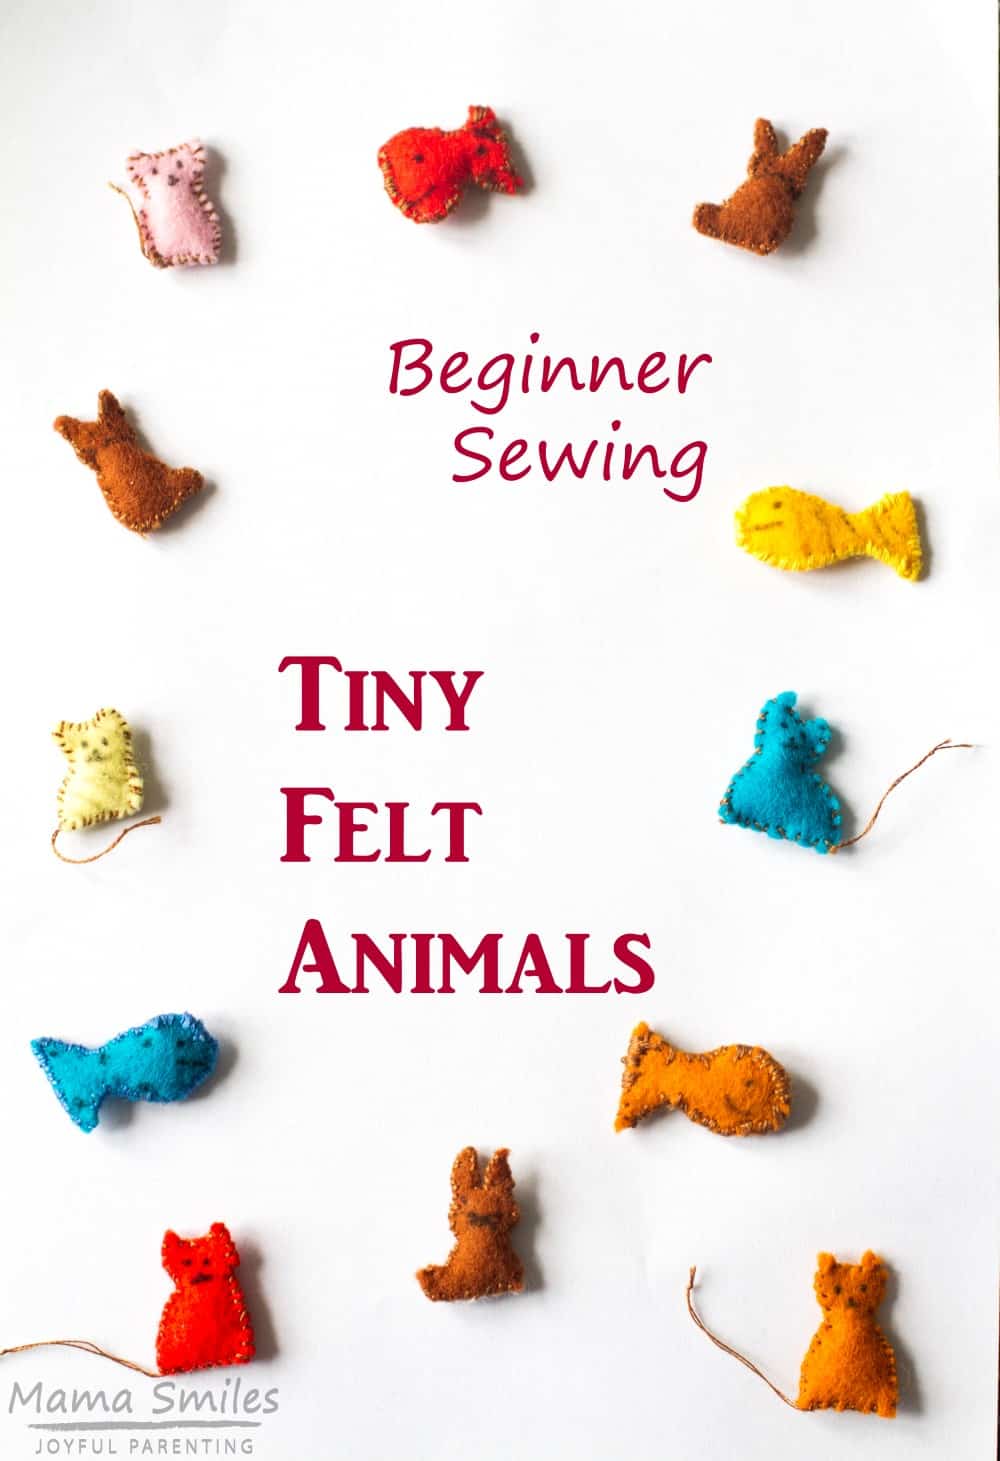 Get kids sewing with this tutorial for sewing adorable tiny felt animals